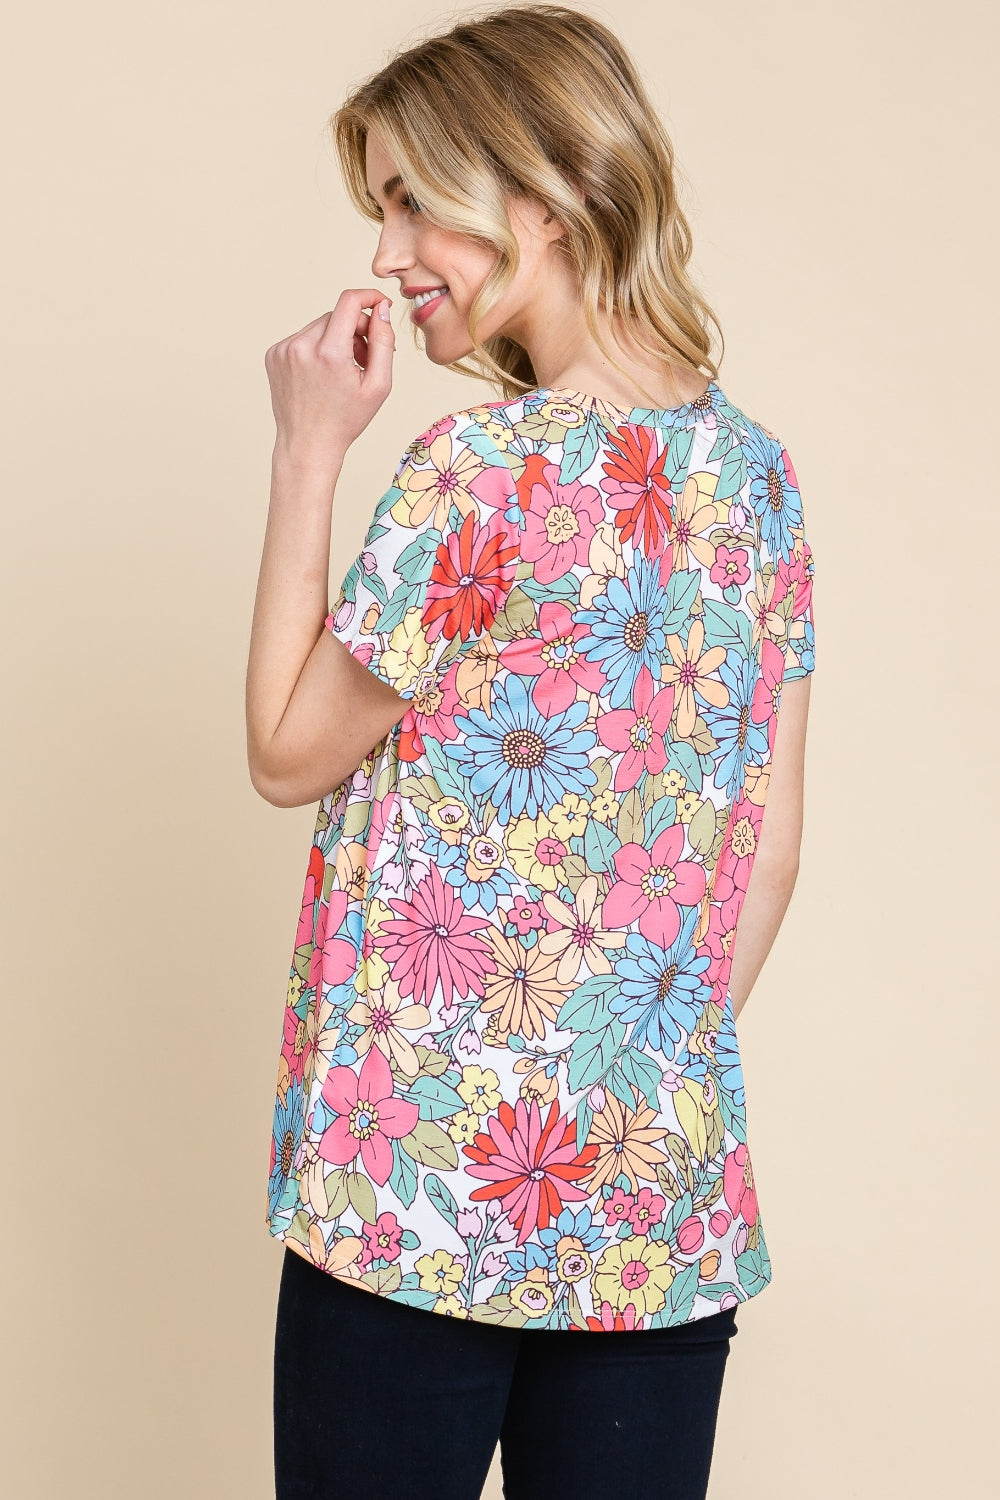 Nelly Floral Short Sleeve Tee